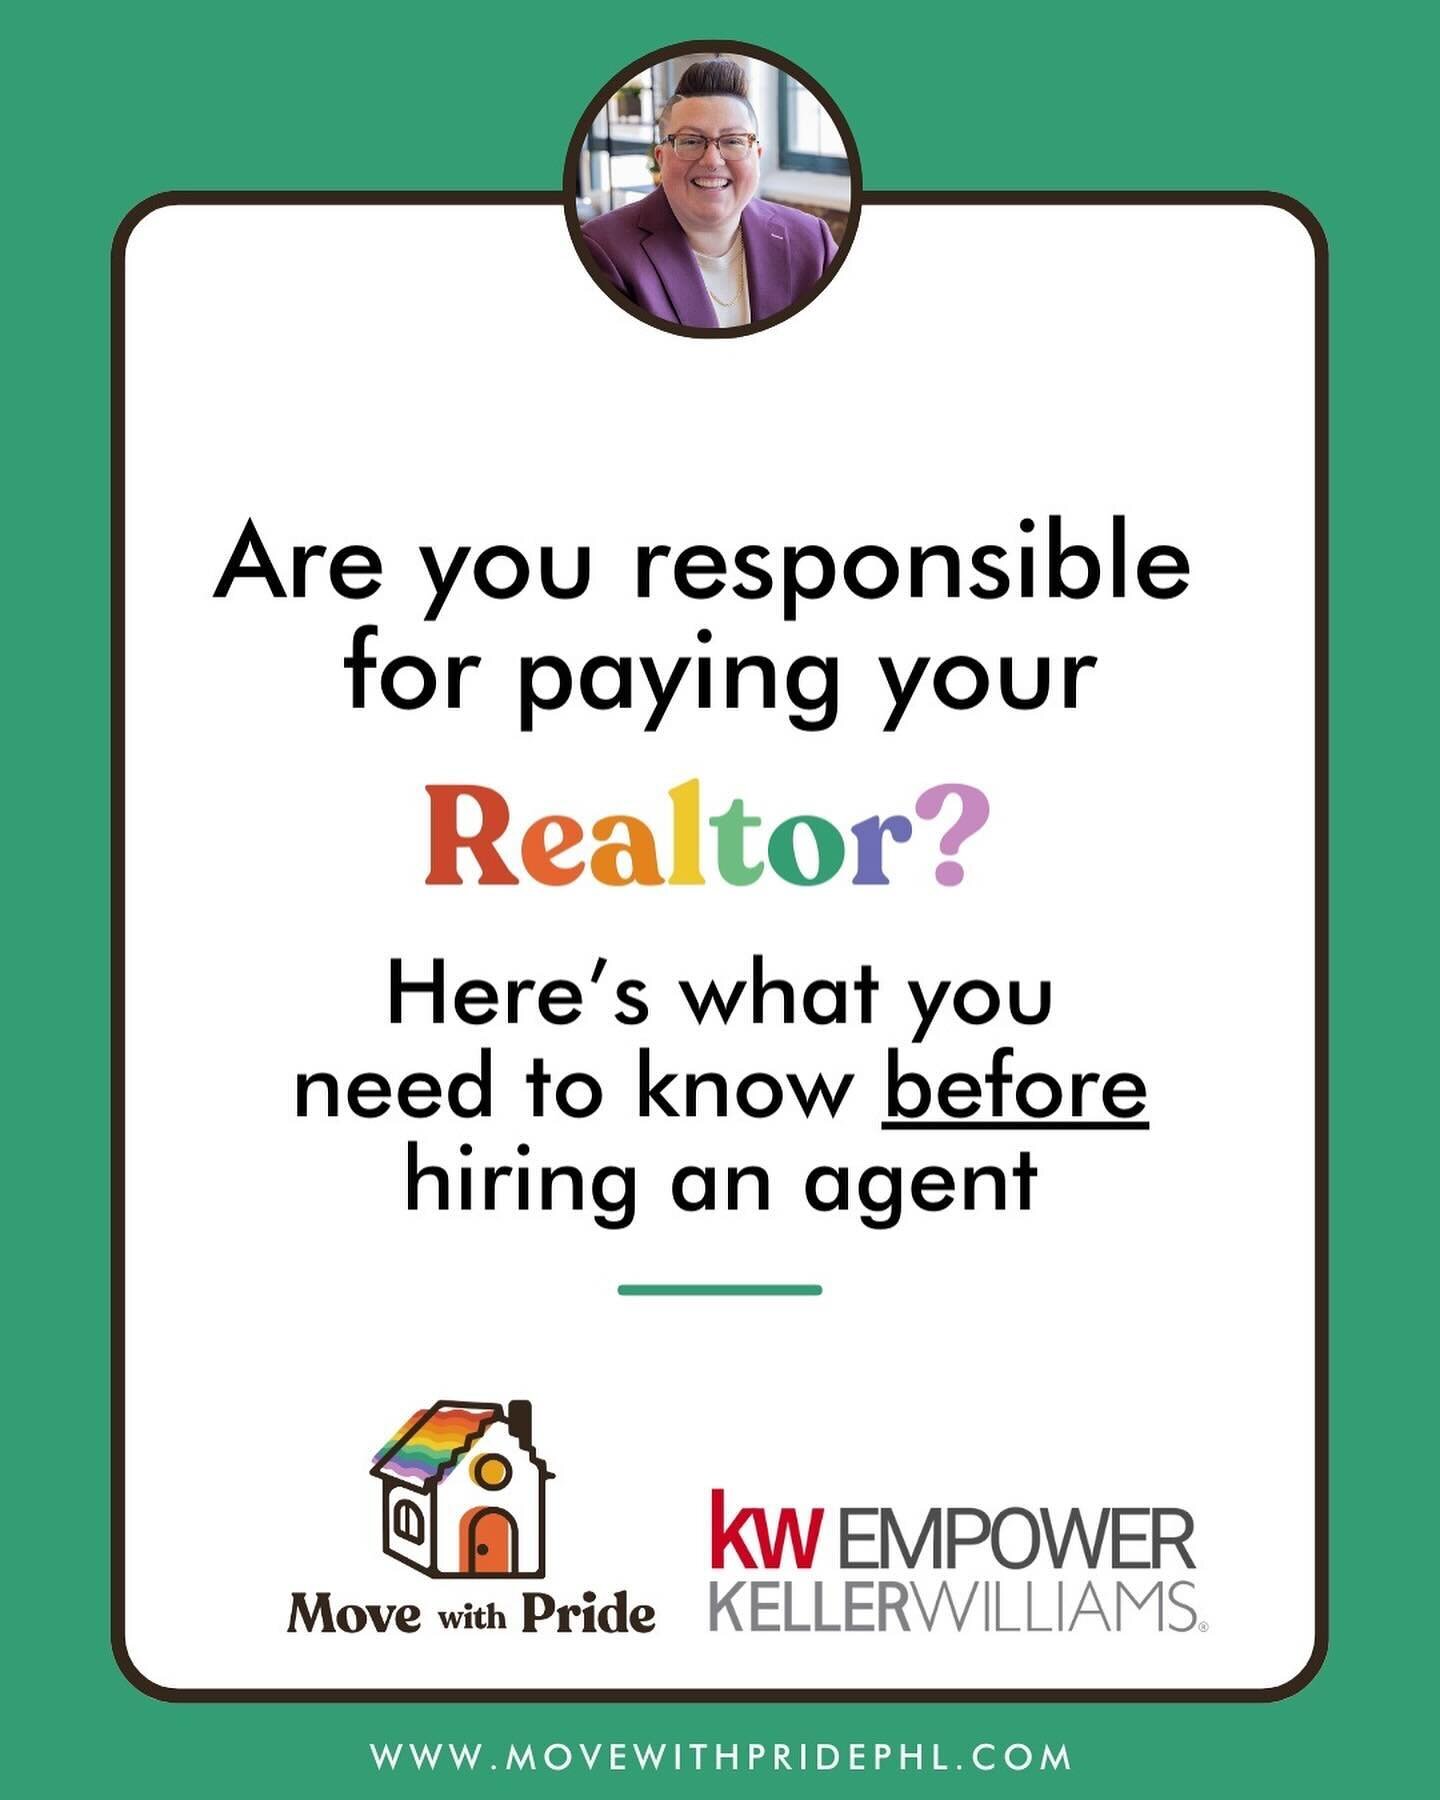 Recently there&rsquo;s been a lot of buzz in the real estate world about agent compensation, so I figured it was worth sharing! Most folks don&rsquo;t know how agents get paid during a transaction, but it&rsquo;s an important factor to consider when 